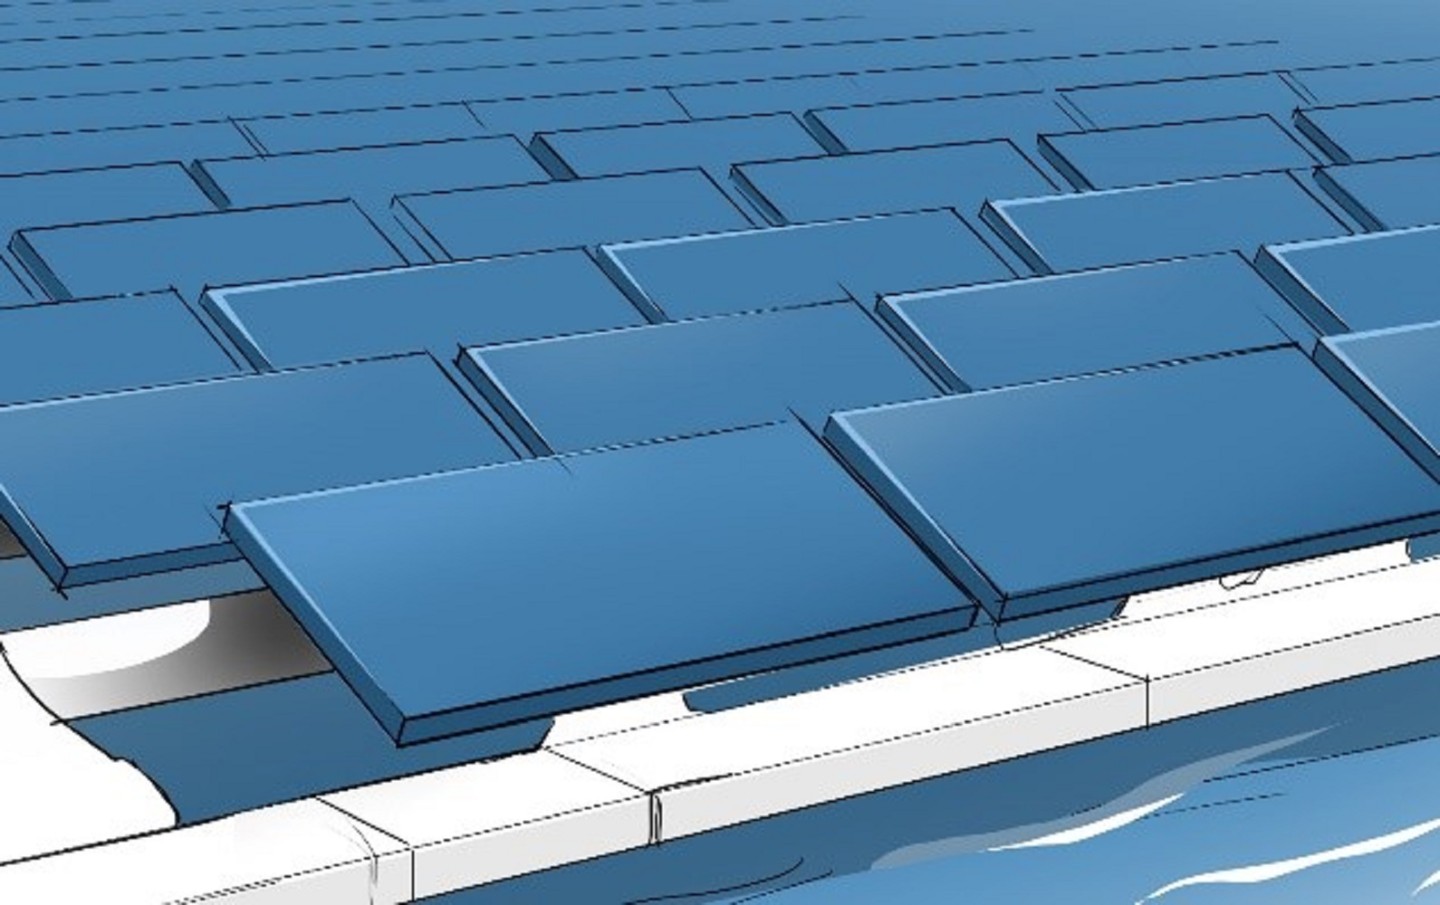 Example of a possible system design for floating PV. In the &quot;PV2Float&quot; project, several different designs and substructures are implemented on an open pit lake